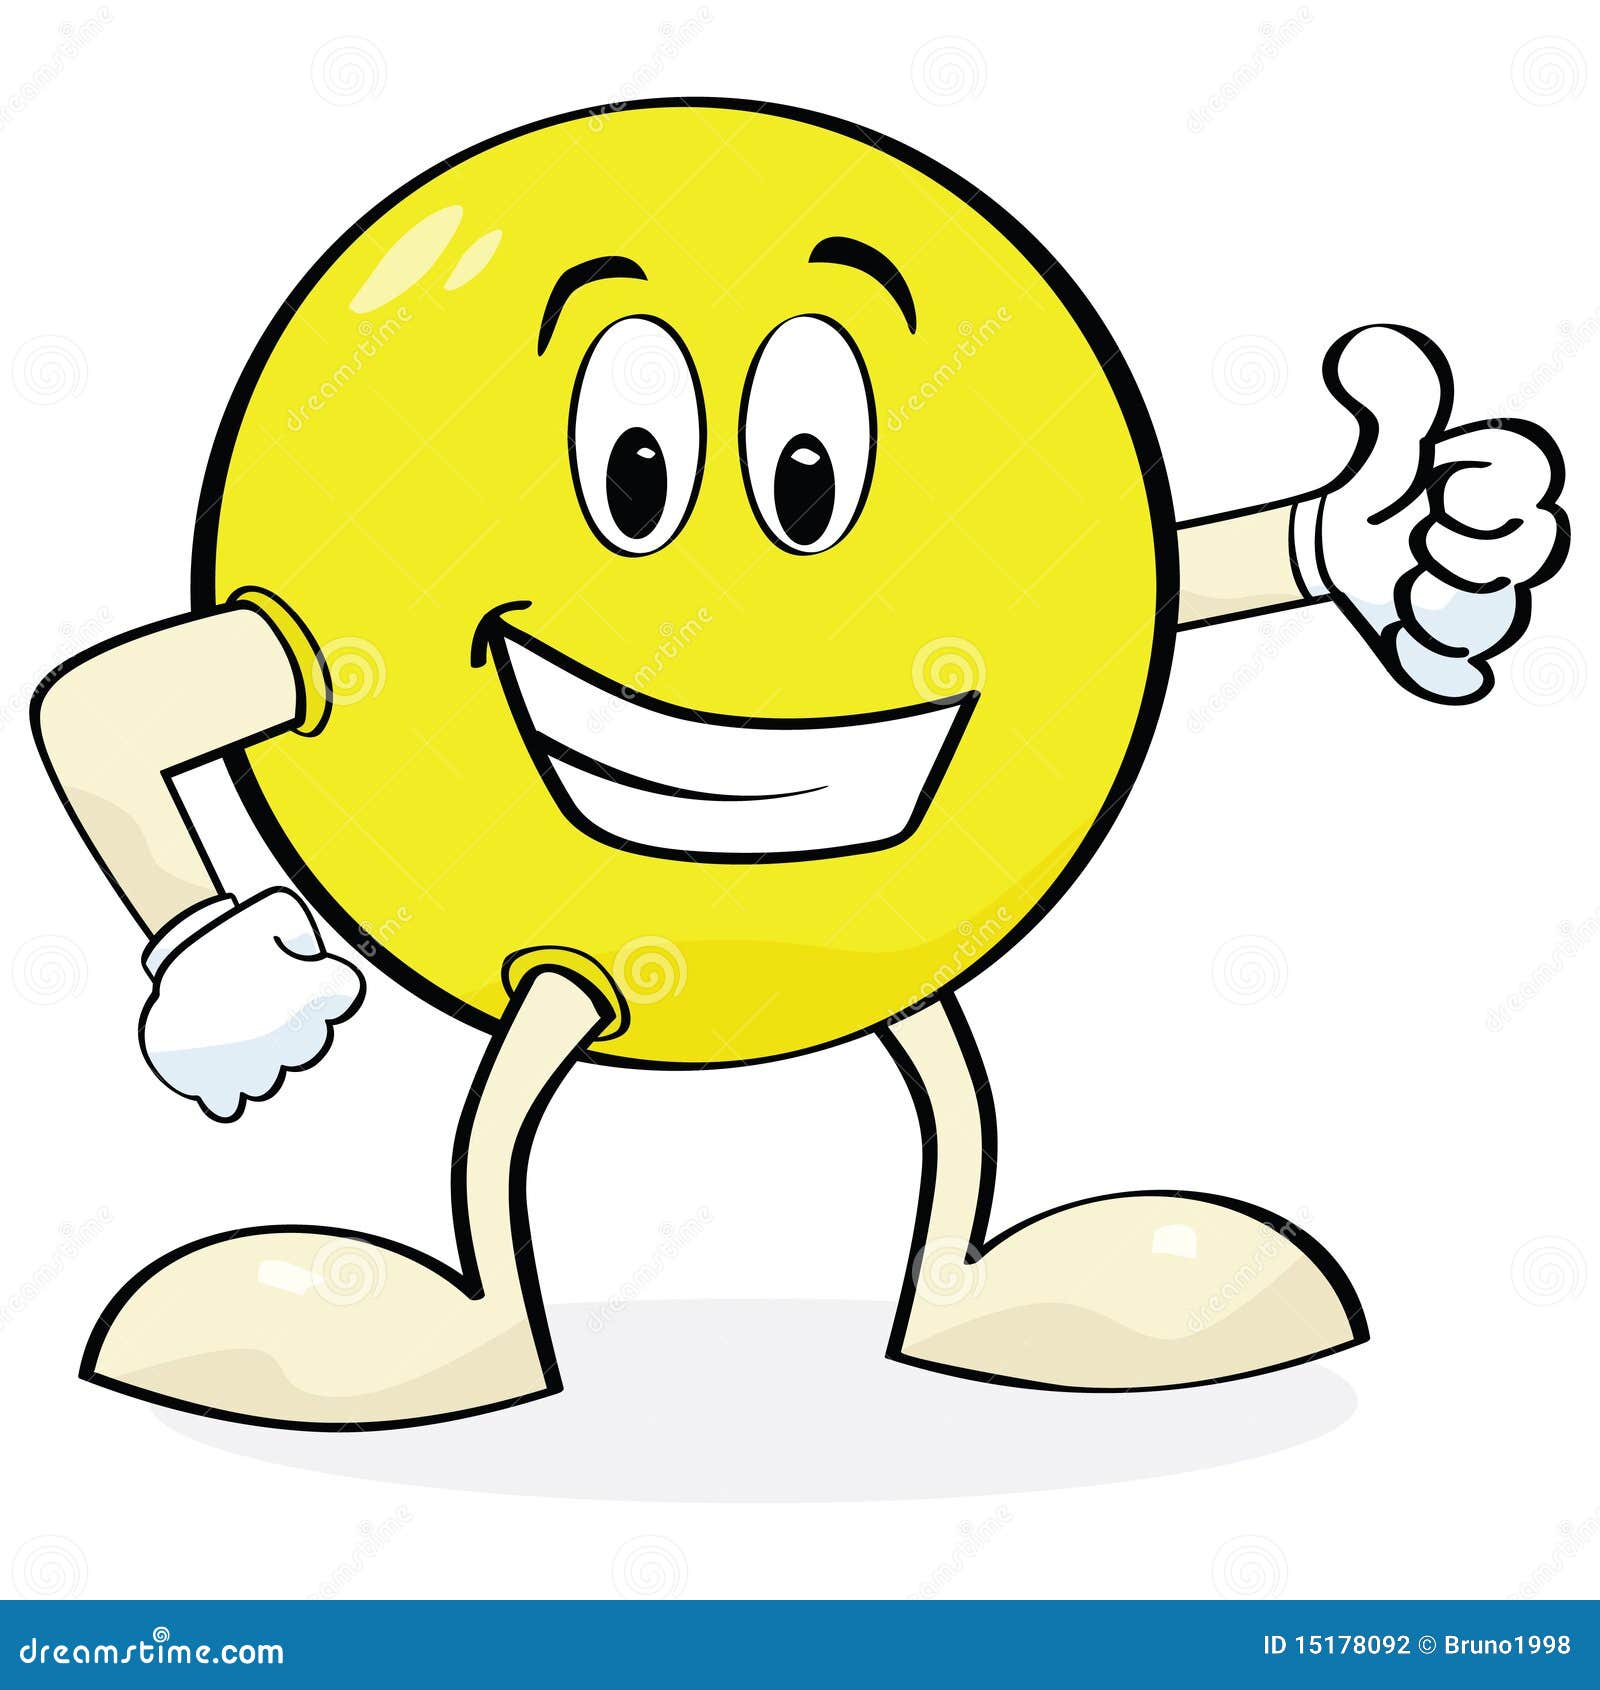 Cartoon giving thumbs up stock vector. Illustration of smiling - 15178092